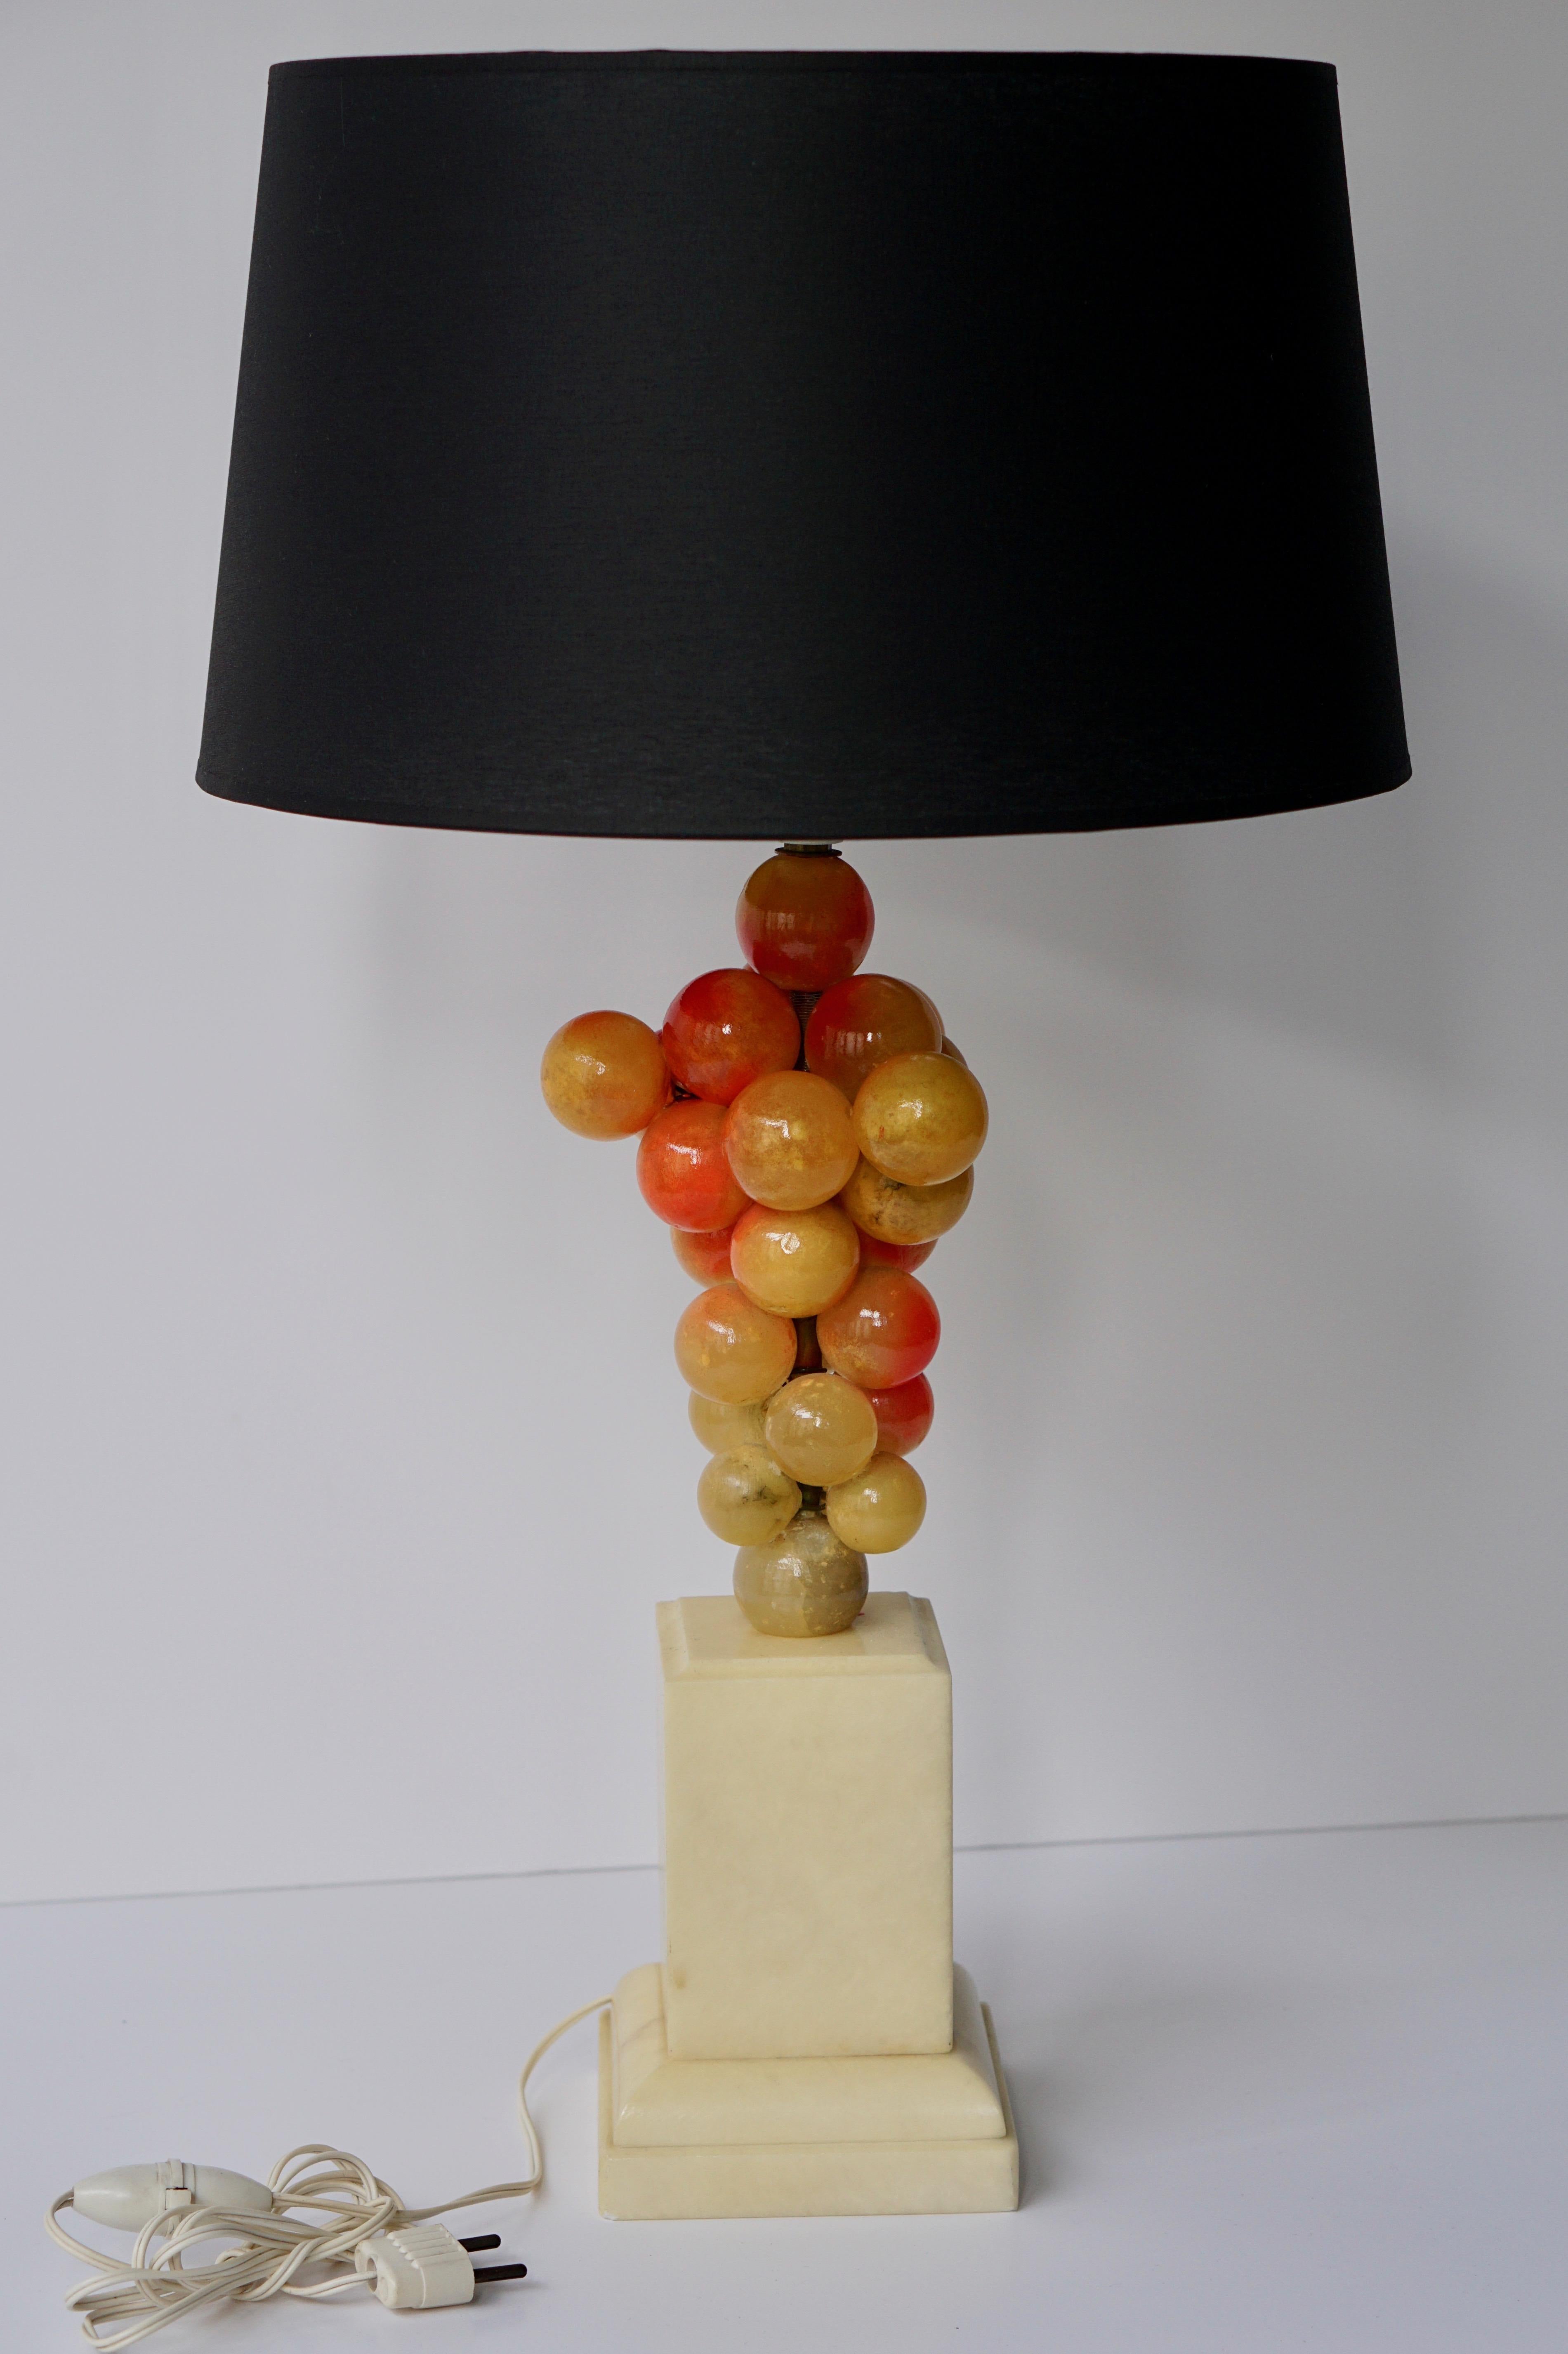 Alabaster grape table lamp.
Measures: Height base with socket 46 cm.
Width 14 cm.
Depth 14 cm.

The lamp shade is not included in the price.